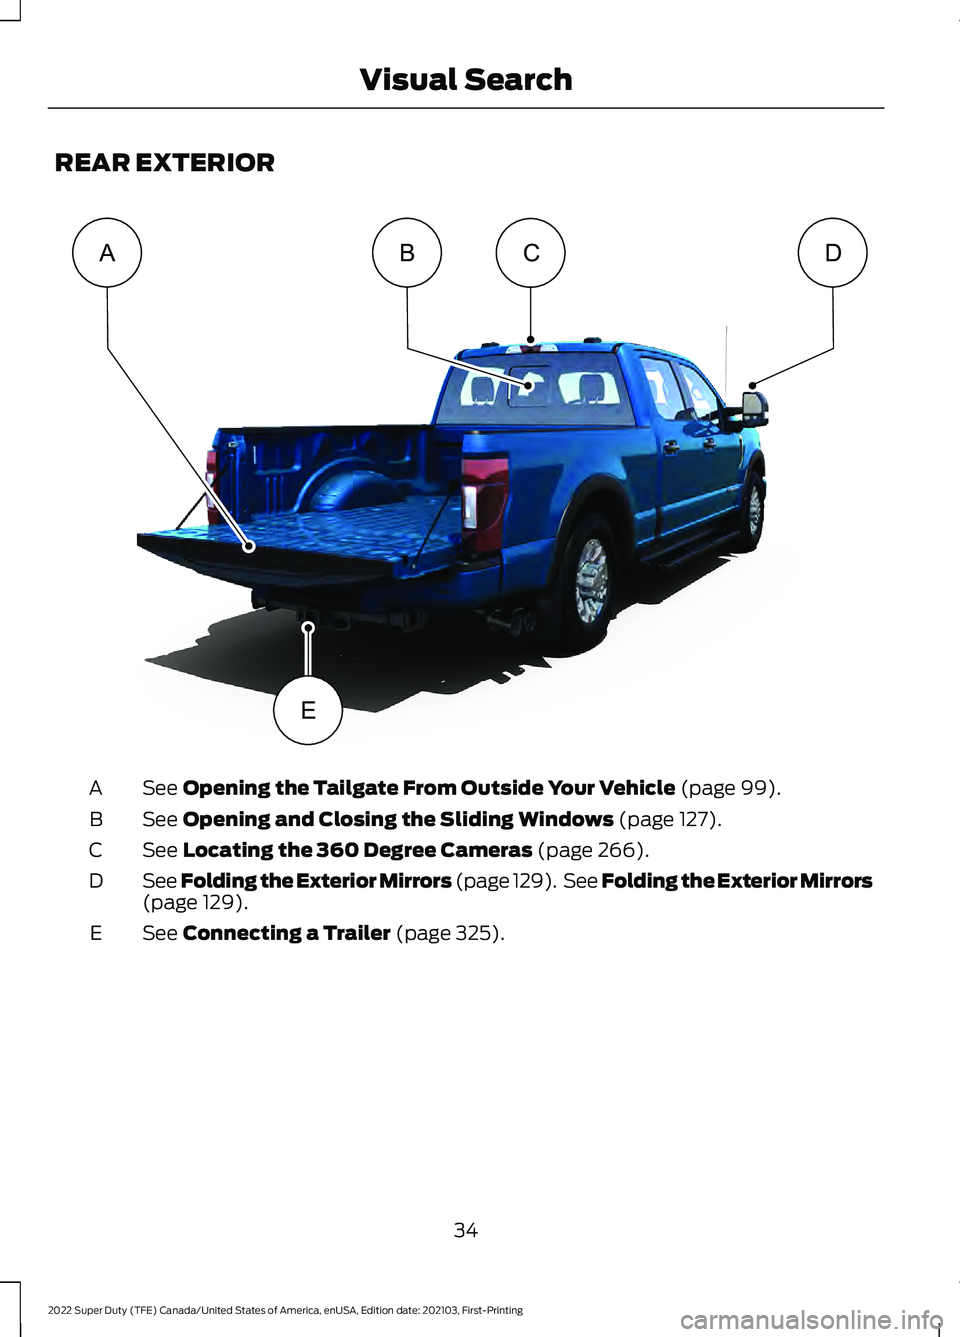 FORD F-350 2022  Owners Manual REAR EXTERIOR
See Opening the Tailgate From Outside Your Vehicle (page 99).
A
See 
Opening and Closing the Sliding Windows (page 127).
B
See 
Locating the 360 Degree Cameras (page 266).
C
See Folding 